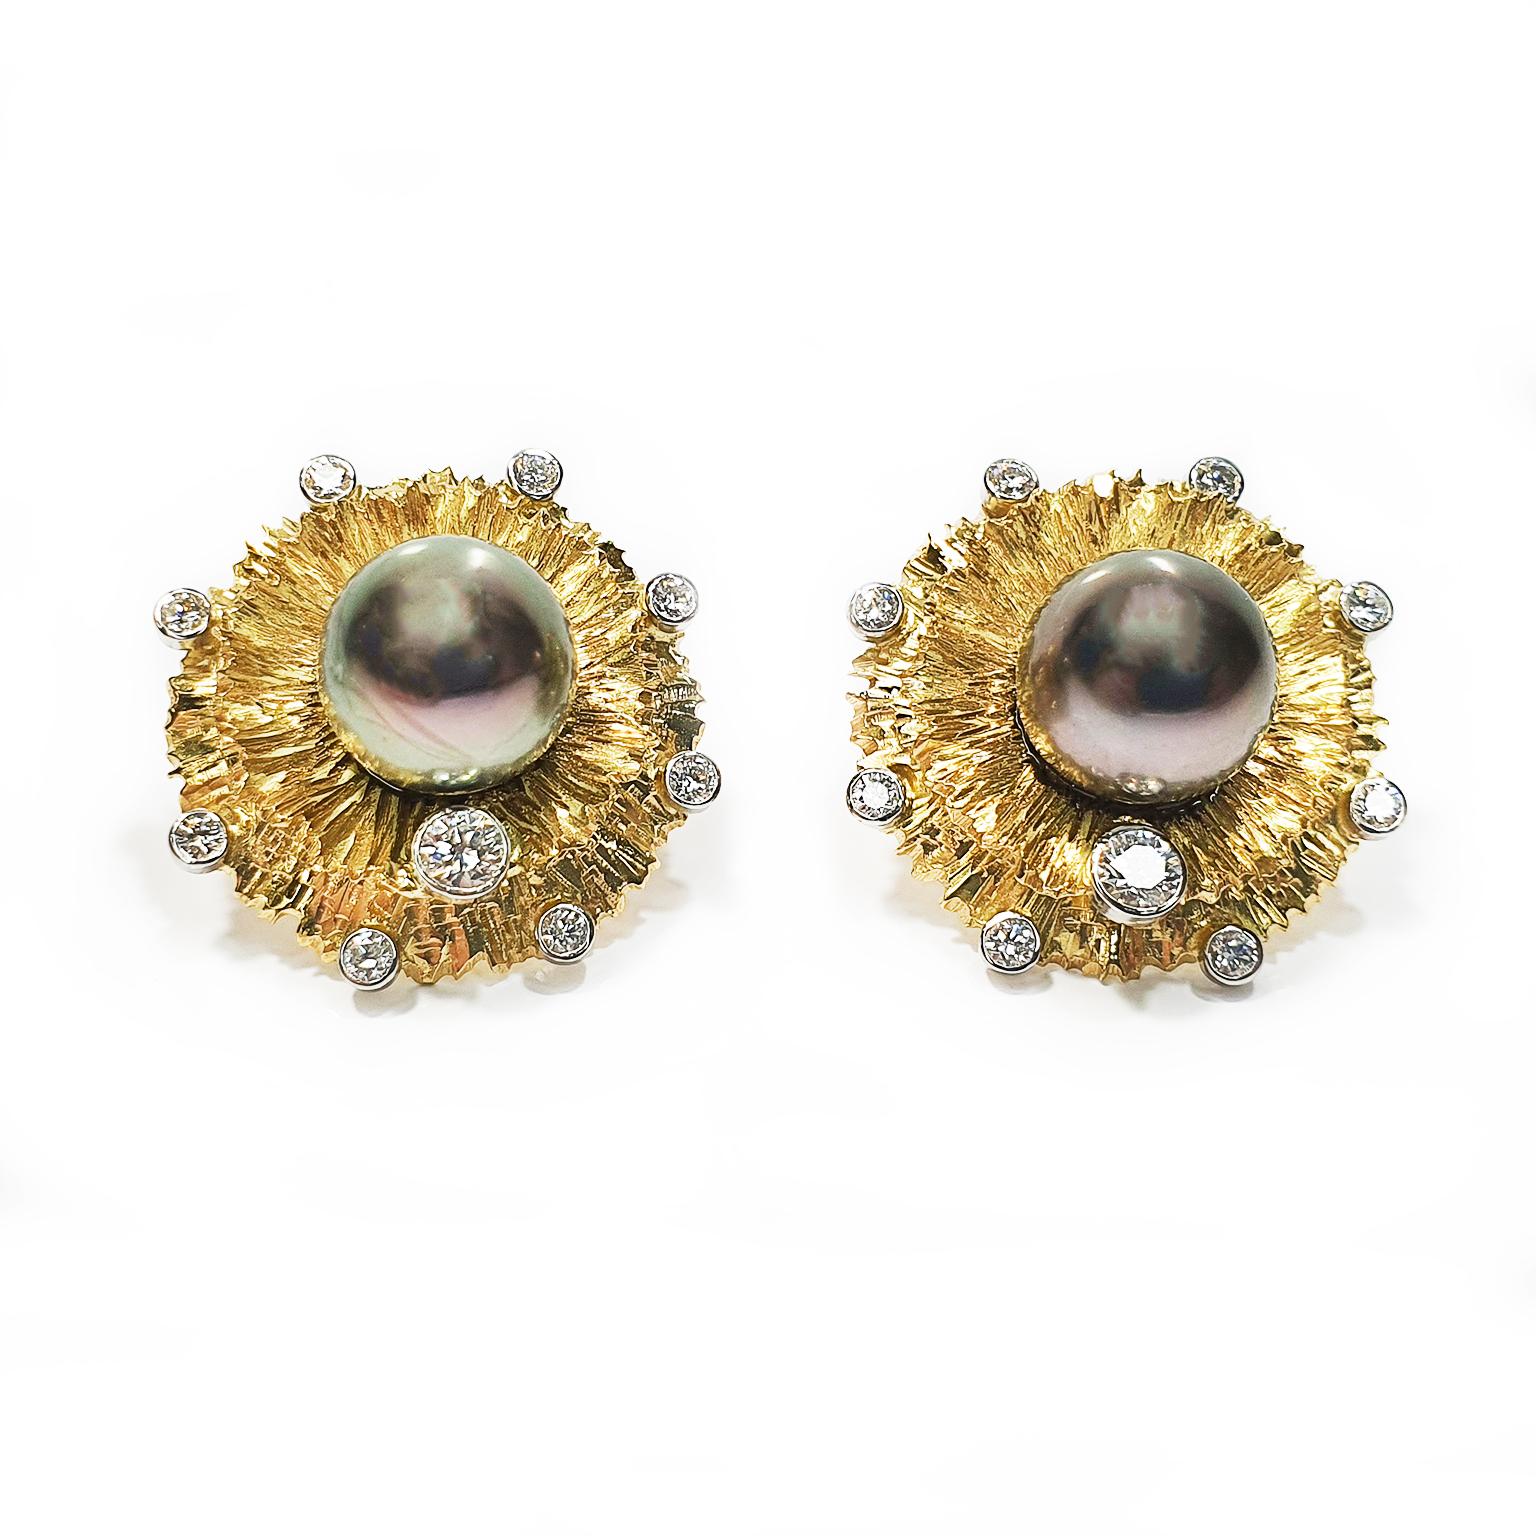 18K yellow gold studs with South Sea Cultured Natural Black Pearls. The earrings feature Pearls that have a 10mm diameter and total weight for the pair is 1.8g with each earring having a diameter of 20mm. Each earring has 18K screw fittings. The